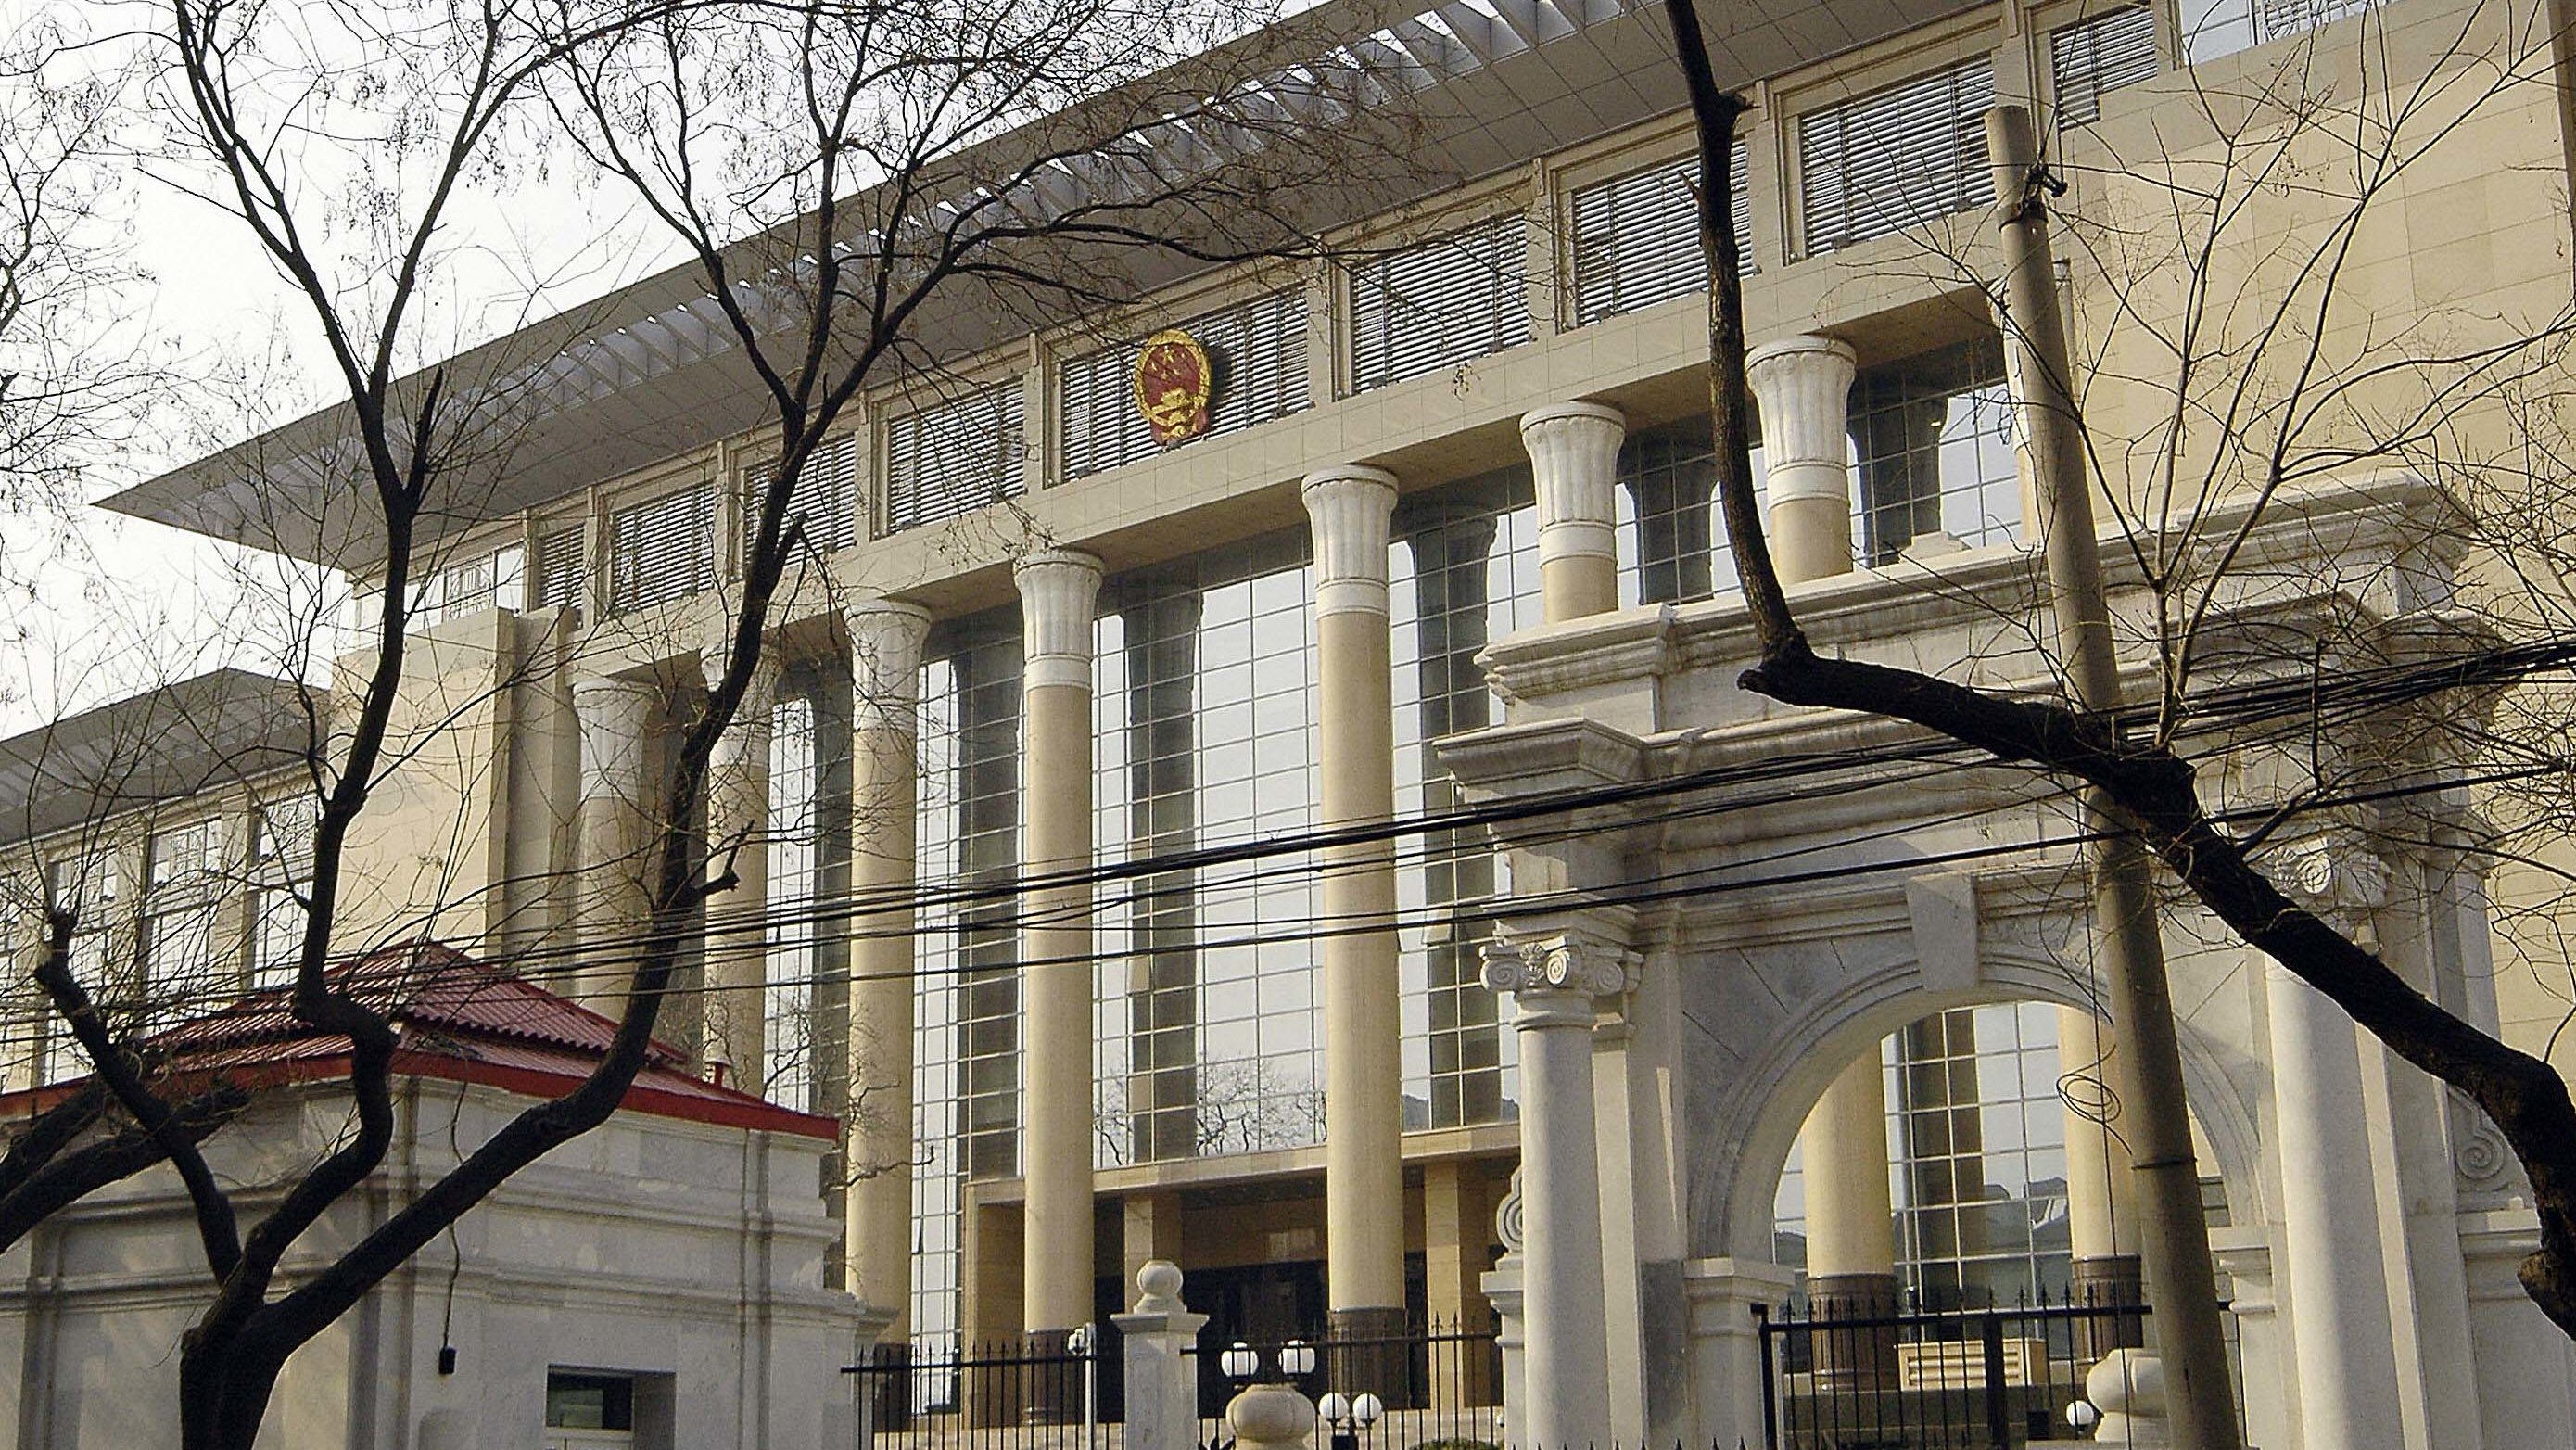 The Chinese Supreme People's Court building in Beijing.